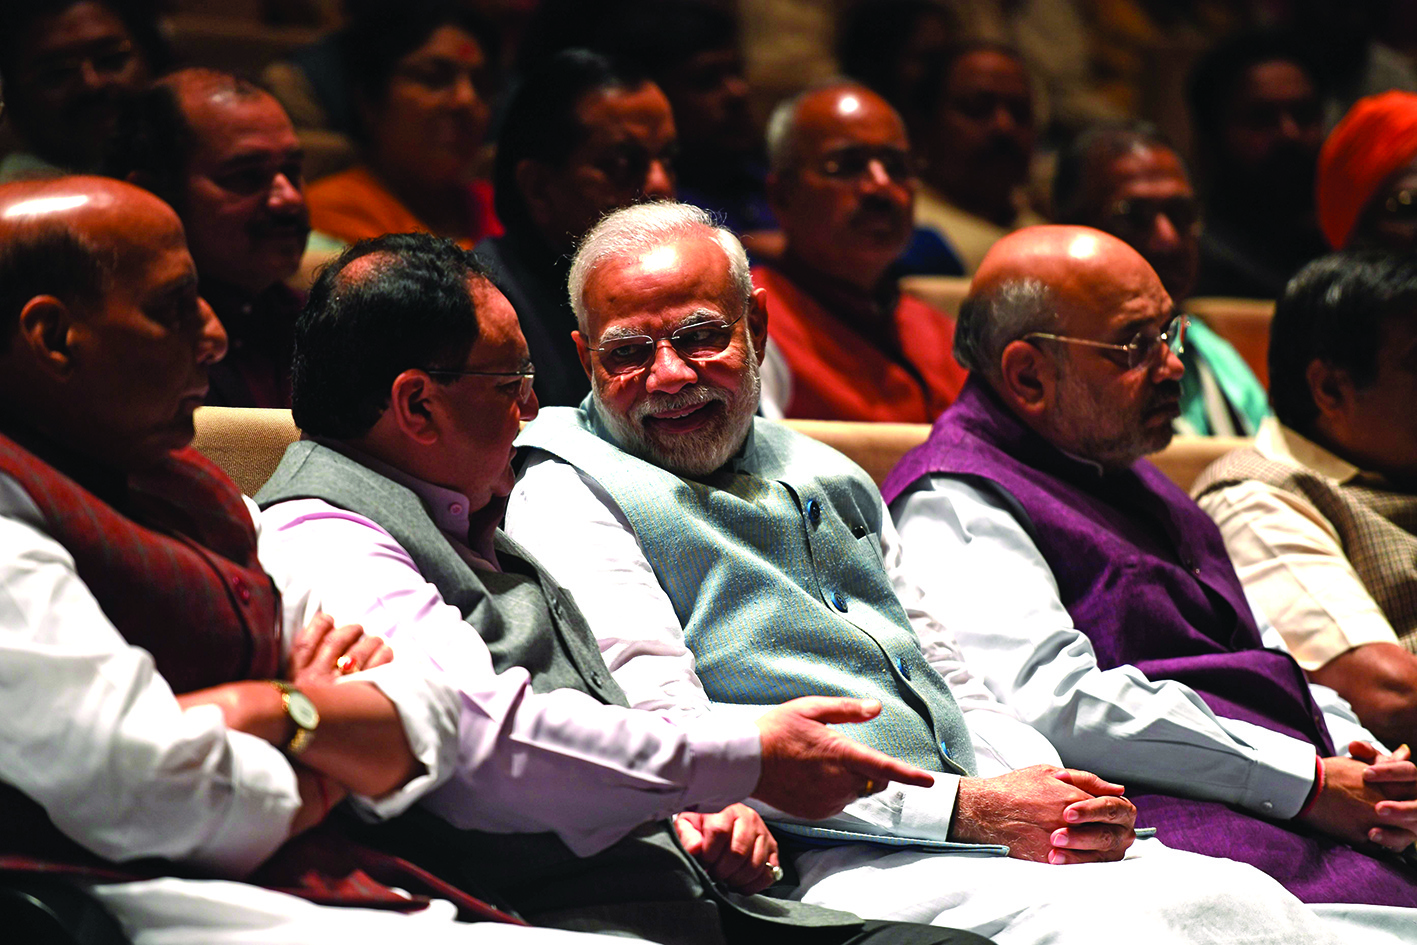 India's Prime Minister Narendra Modi (C) talks with Bharatiya Janata Party (BJP)†National President Jagat Prakash Nadda†(2L) as Home Minister Amit Shah (R) and Defence Minister Rajnath Singh (L) look on during a Bharatiya Janata Party (BJP) parliamentary committee meeting at the Parliament House in New Delhi on March 3, 2020. (Photo by Prakash SINGH / AFP)